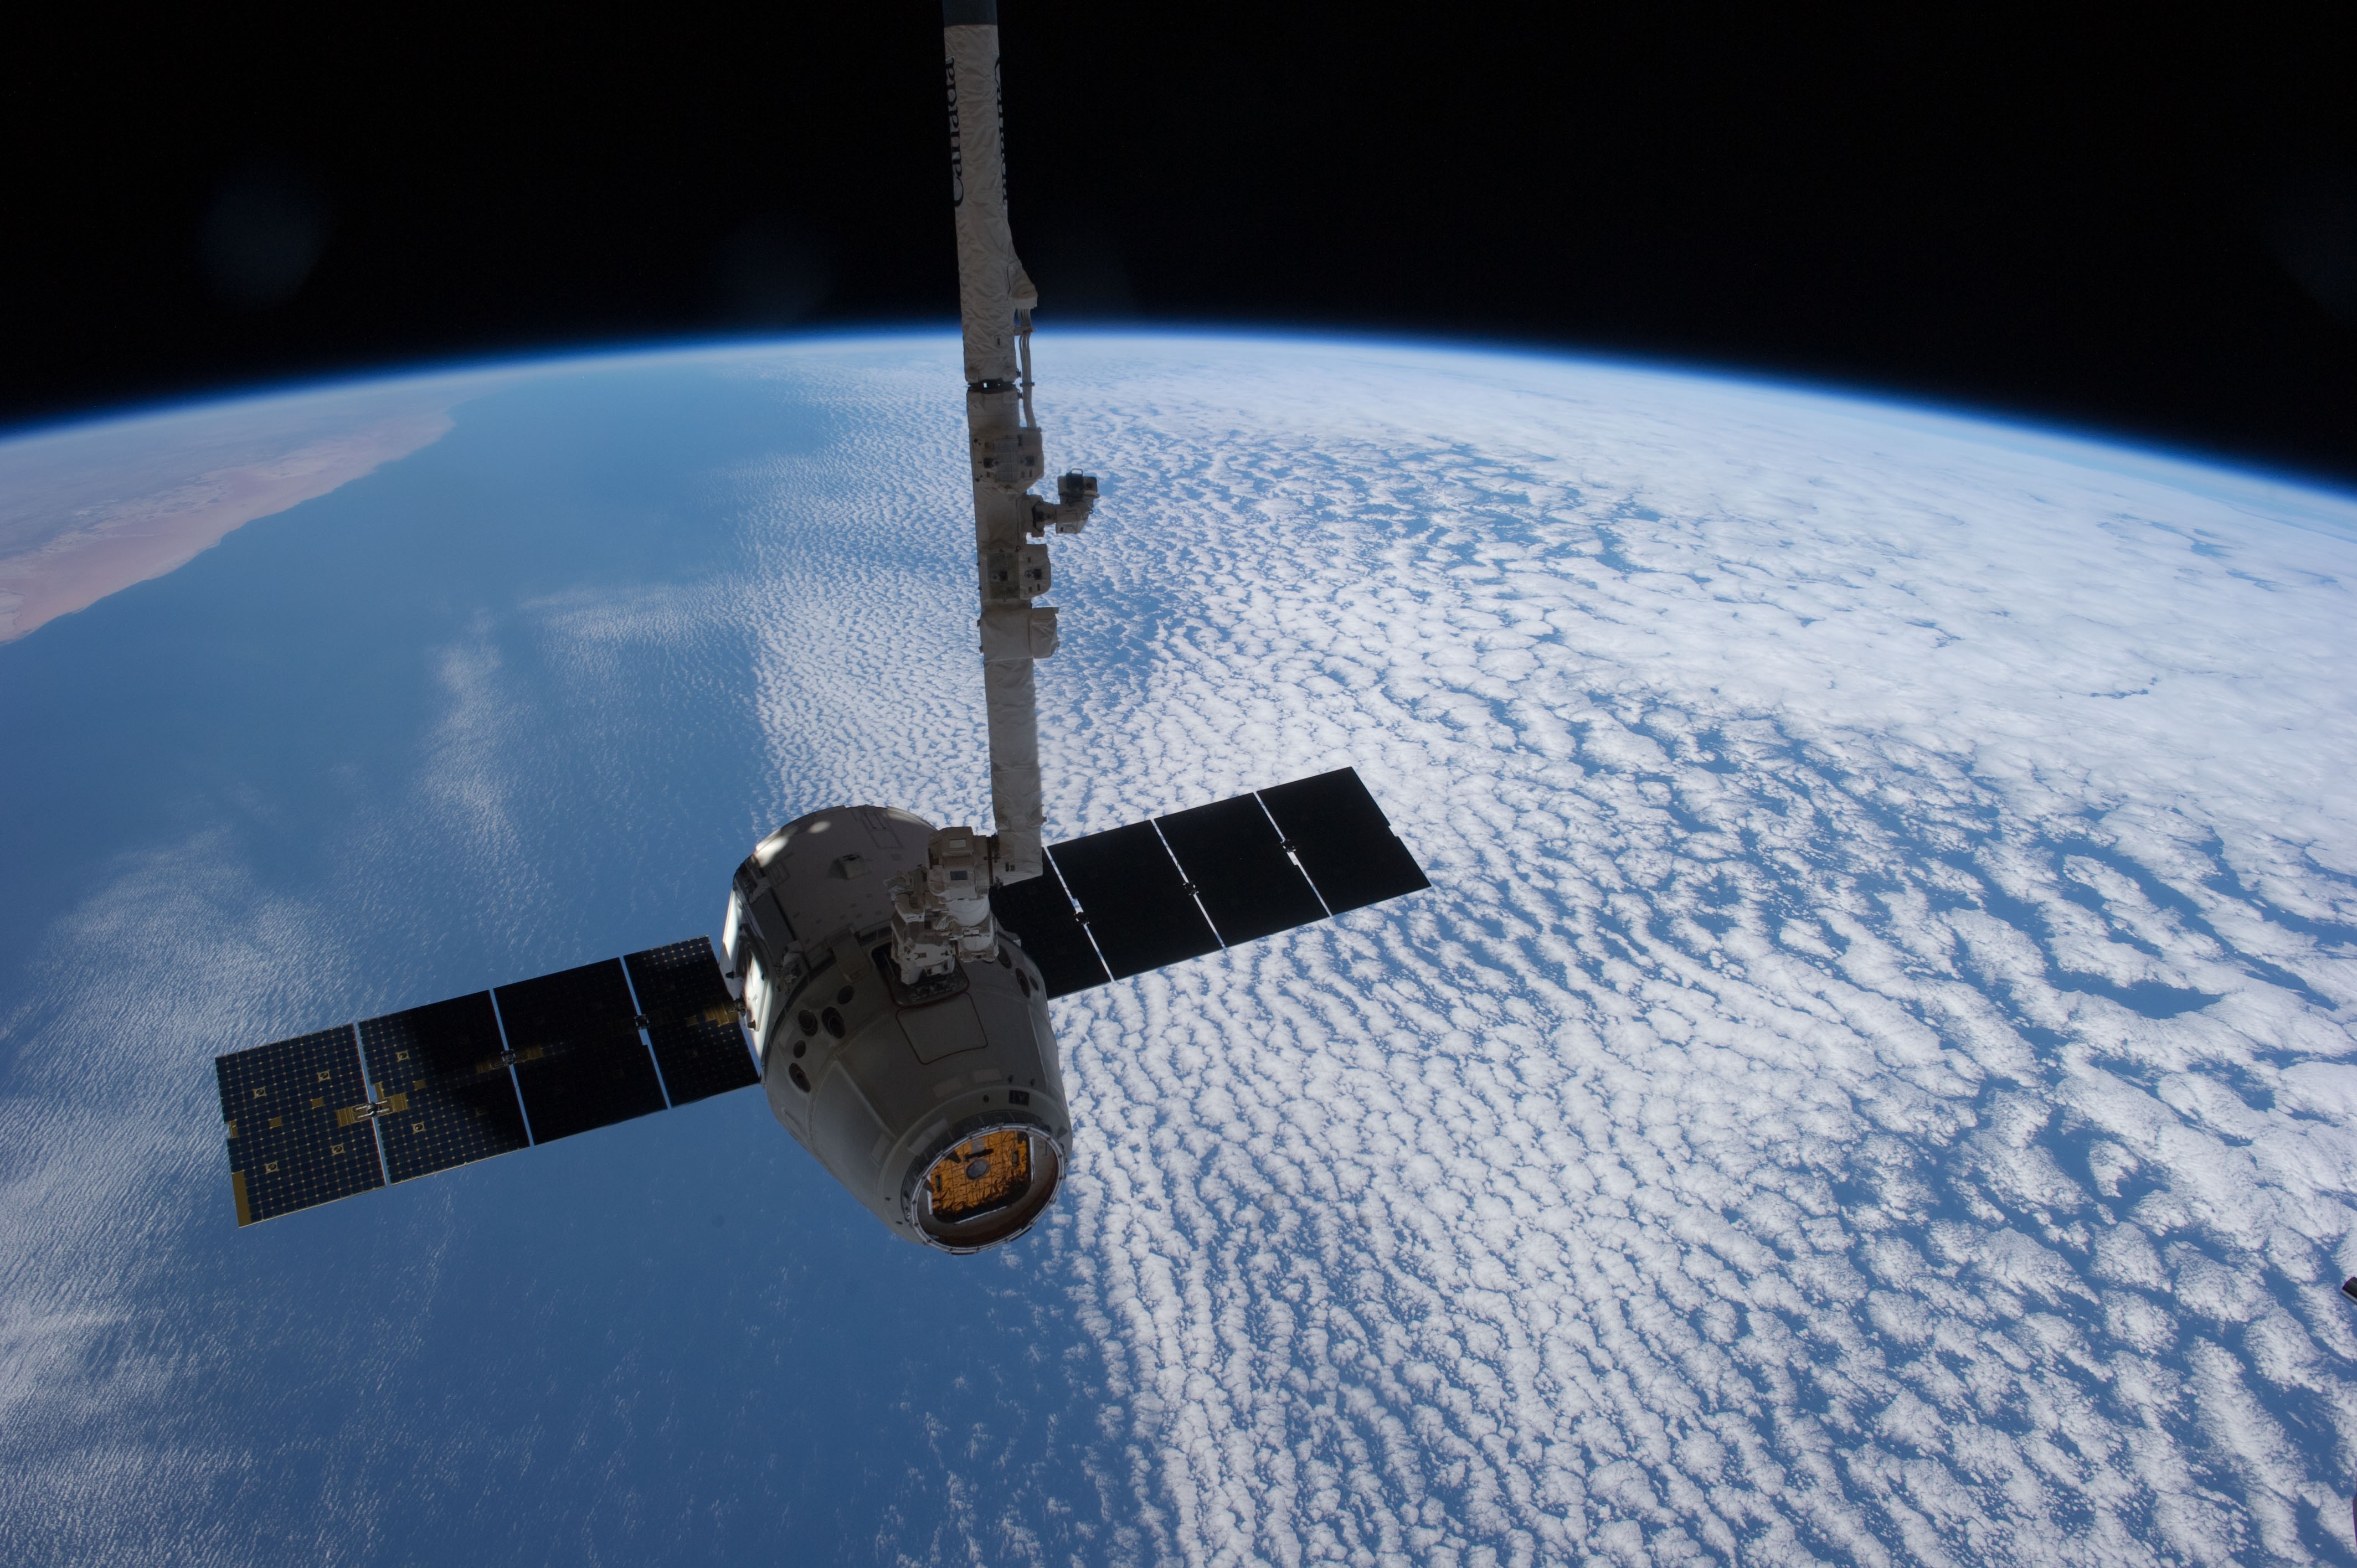 This image provided by Nasa shows the SpaceX Dragon cargo craft just prior to being released by the International Space Station's Canadarm2 robotic arm in 2012. Photo: AP/Nasa